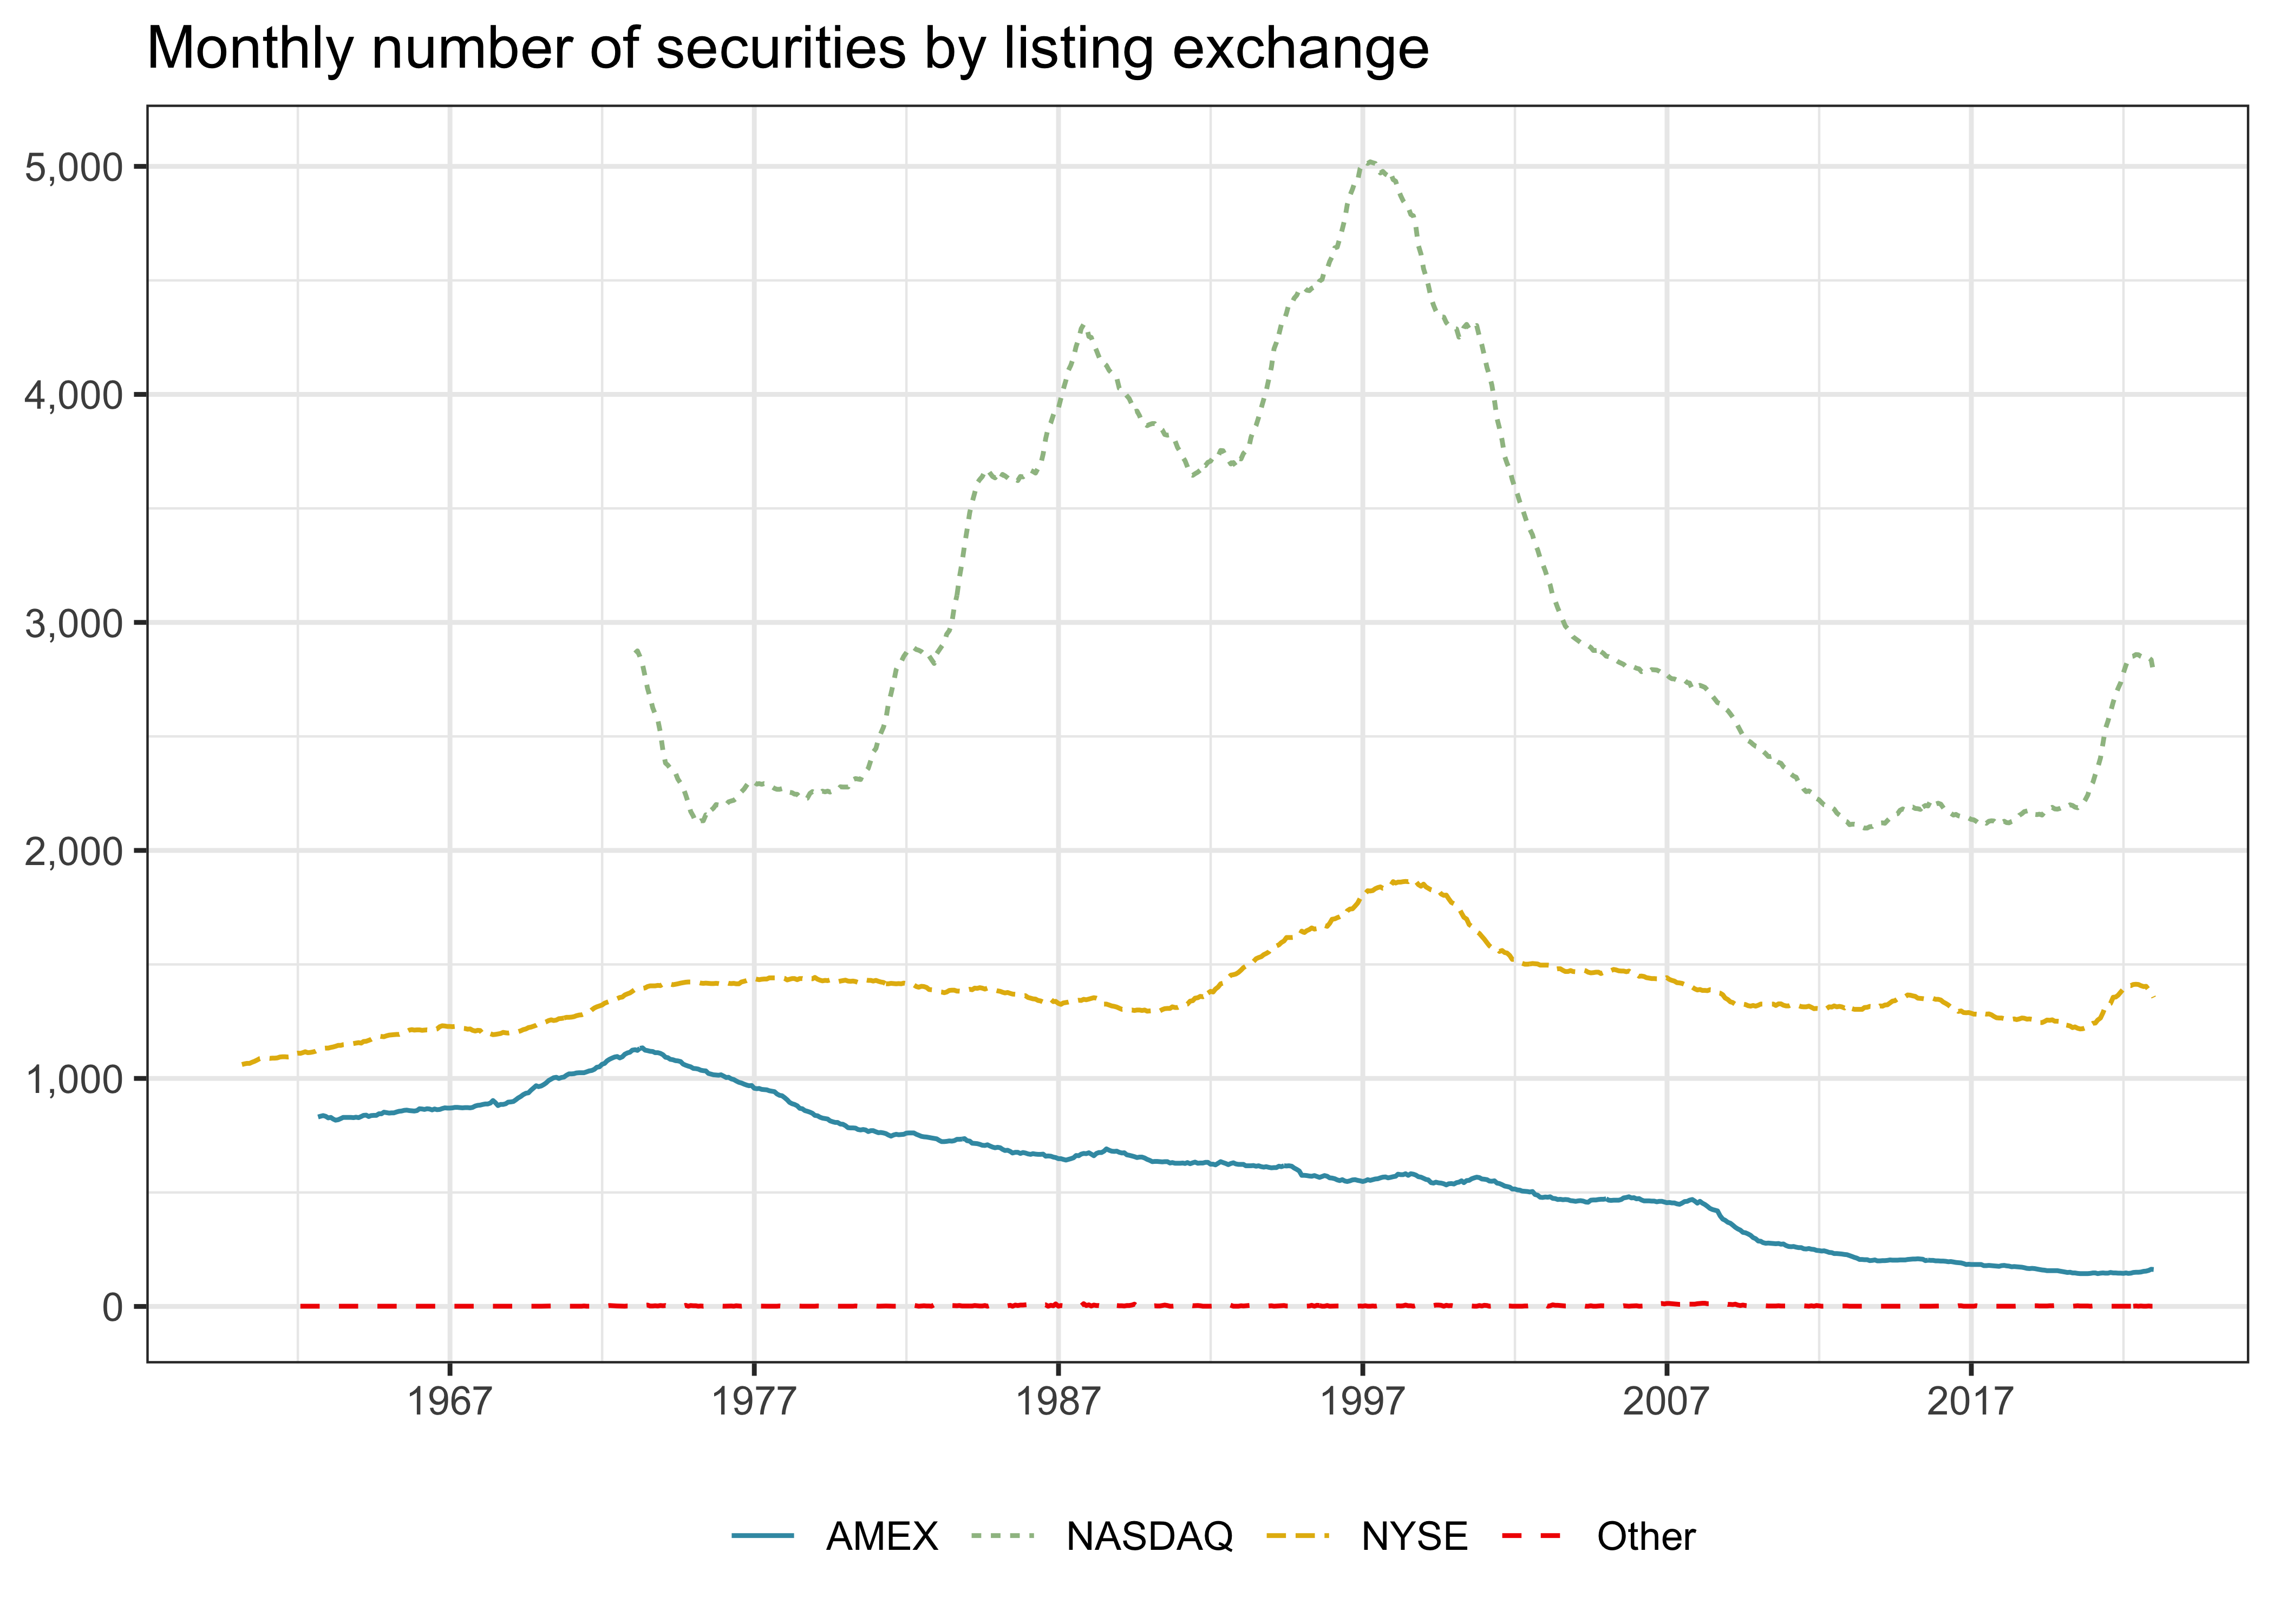 Title: Monthly number of securities by listing exchange. The figure shows a line chart with the number of securities by listing exchange from 1960 to 2022. In the earlier period, NYSE dominated as a listing exchange. There is a strong upwards trend for NASDAQ. Other listing exchanges do only play a minor role.